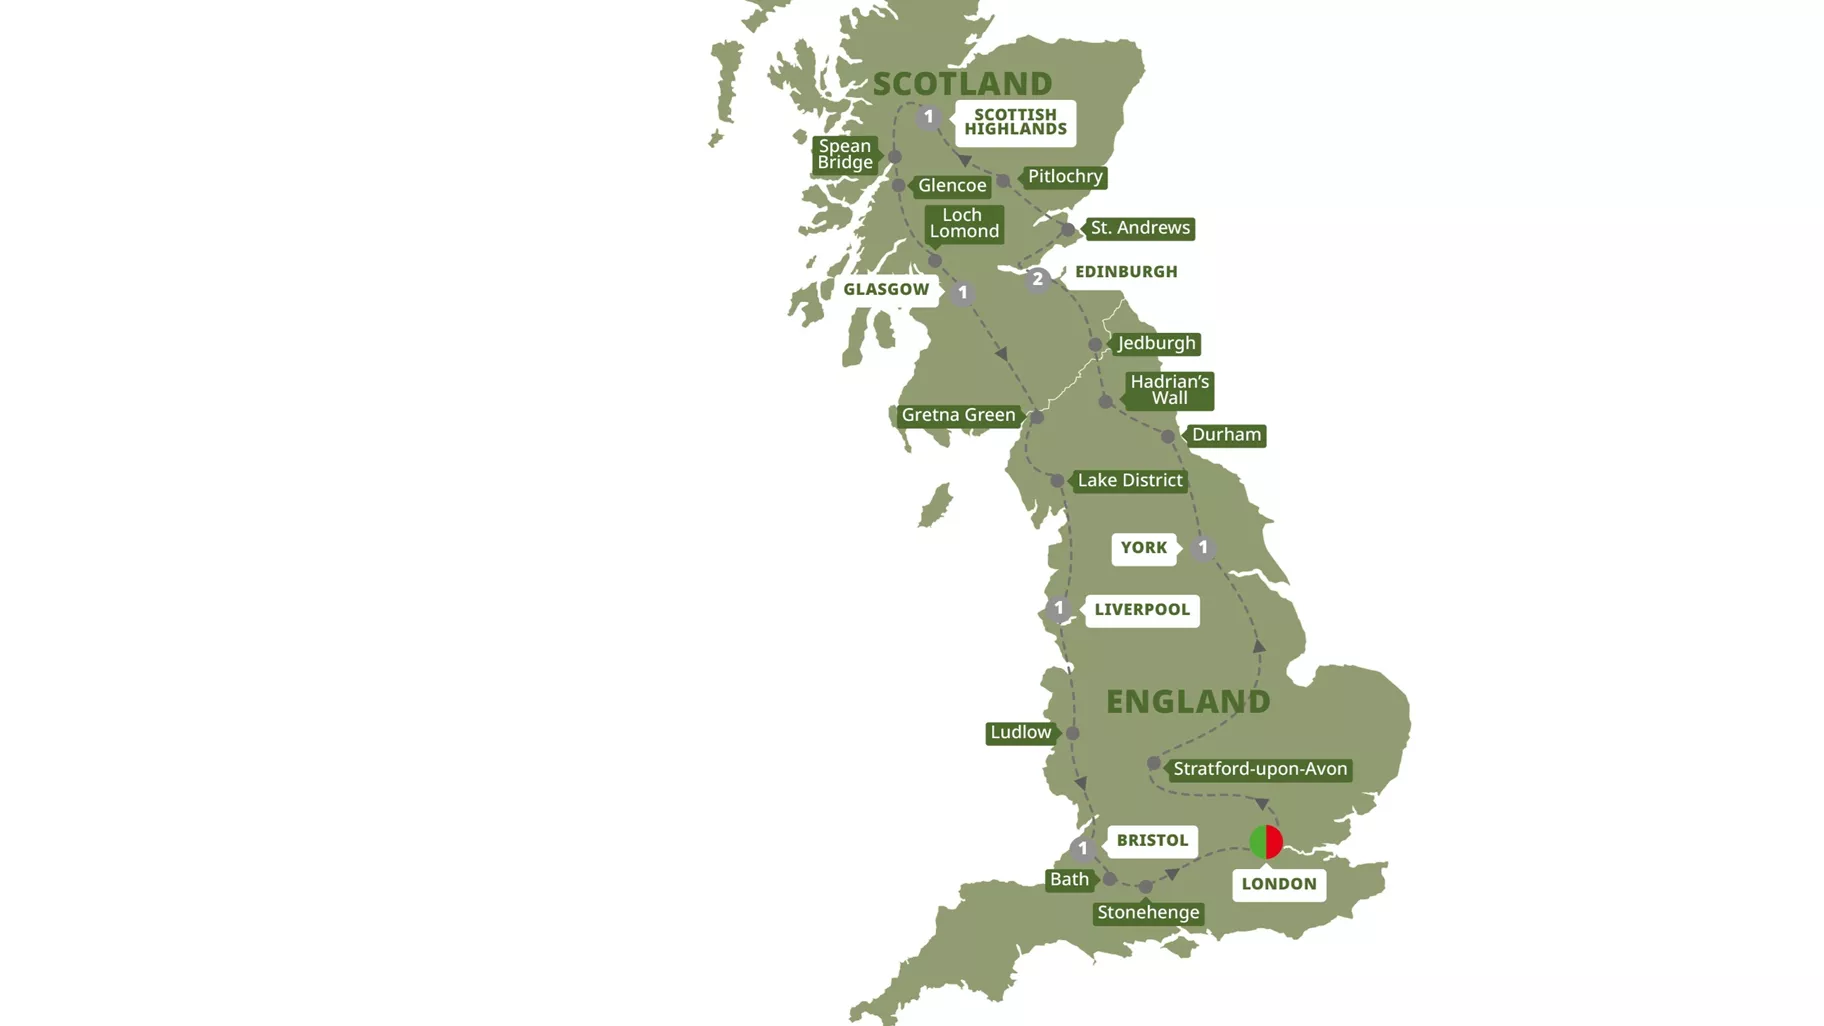 Amazing Britain Guided Tour Map